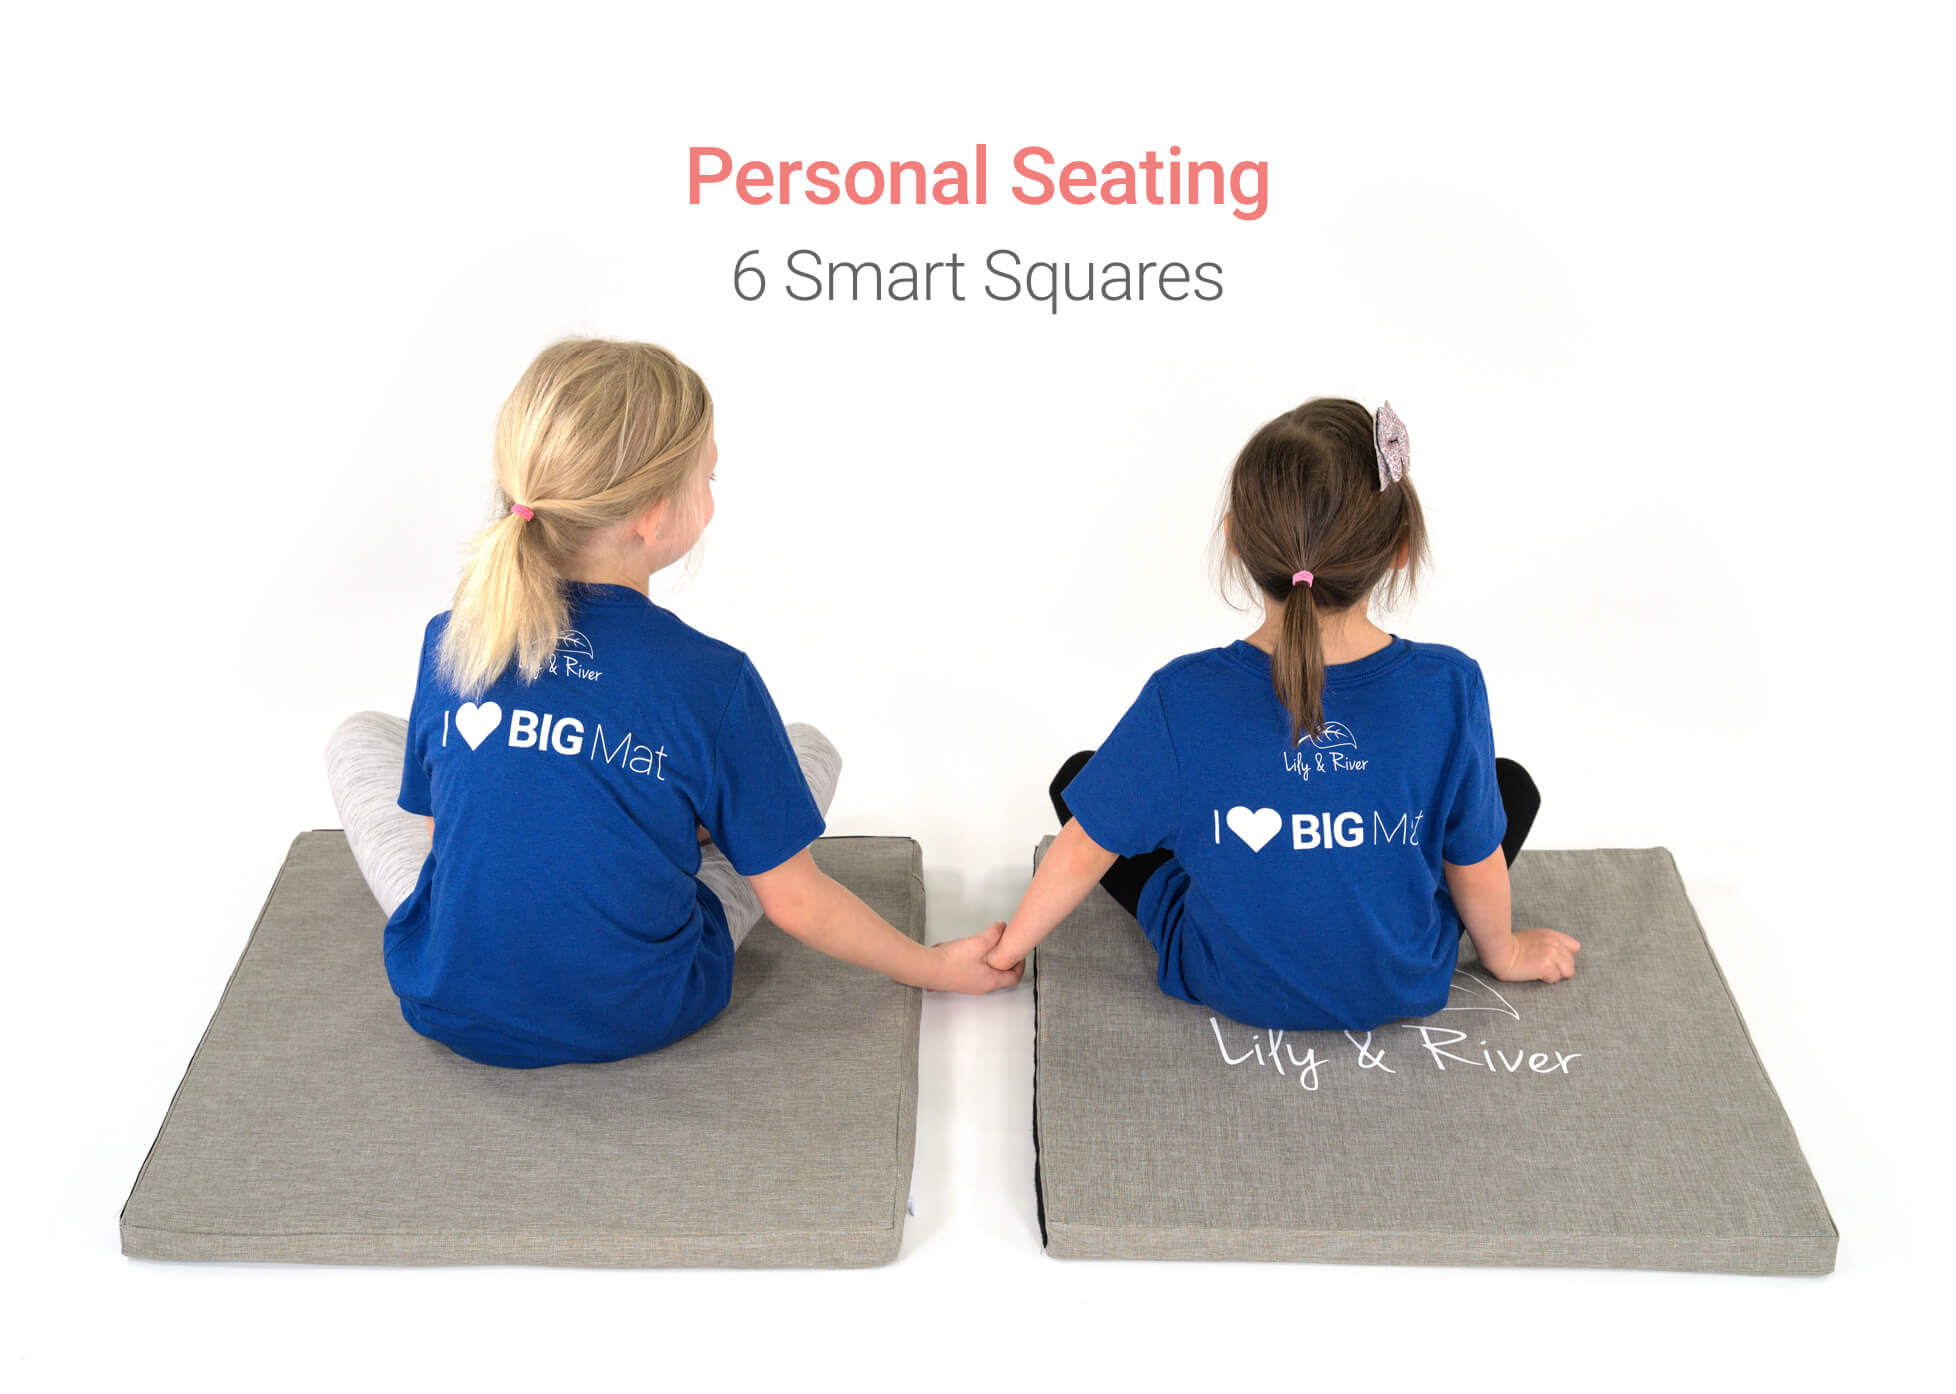 Lily and River Big Mat Personal Seating